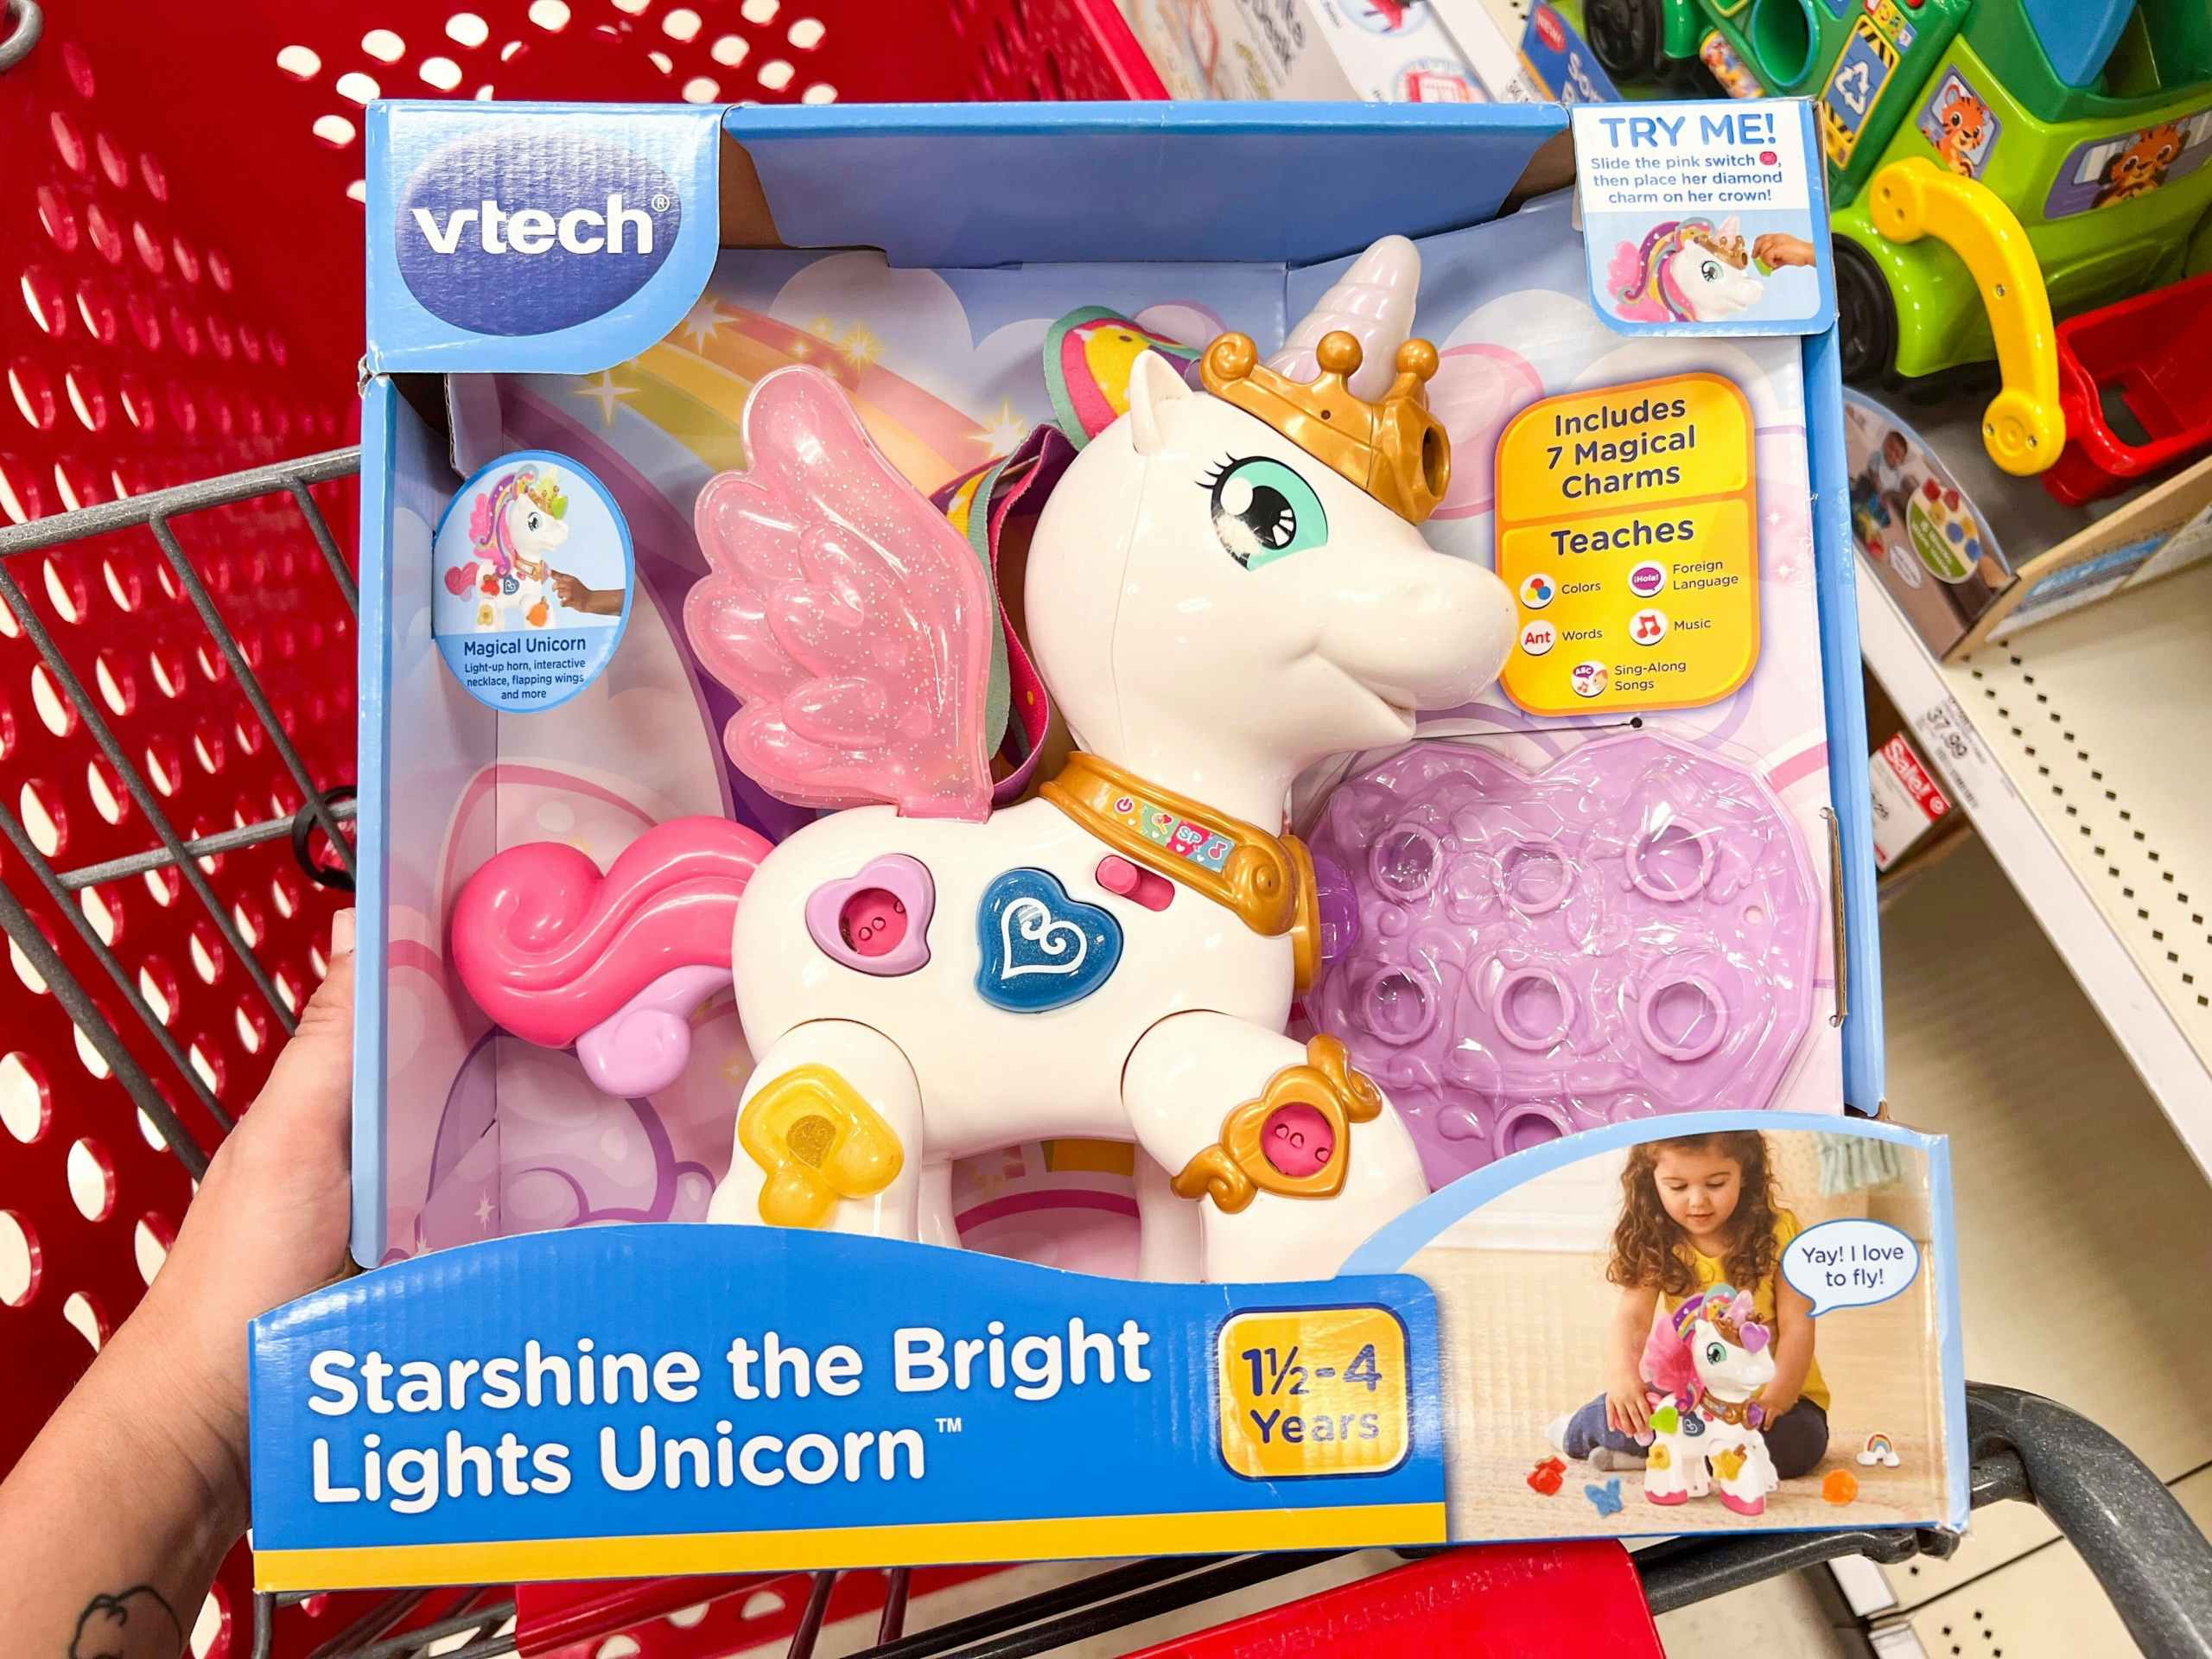 hand holding Vtech Unicorn in in the basket of a Target cart